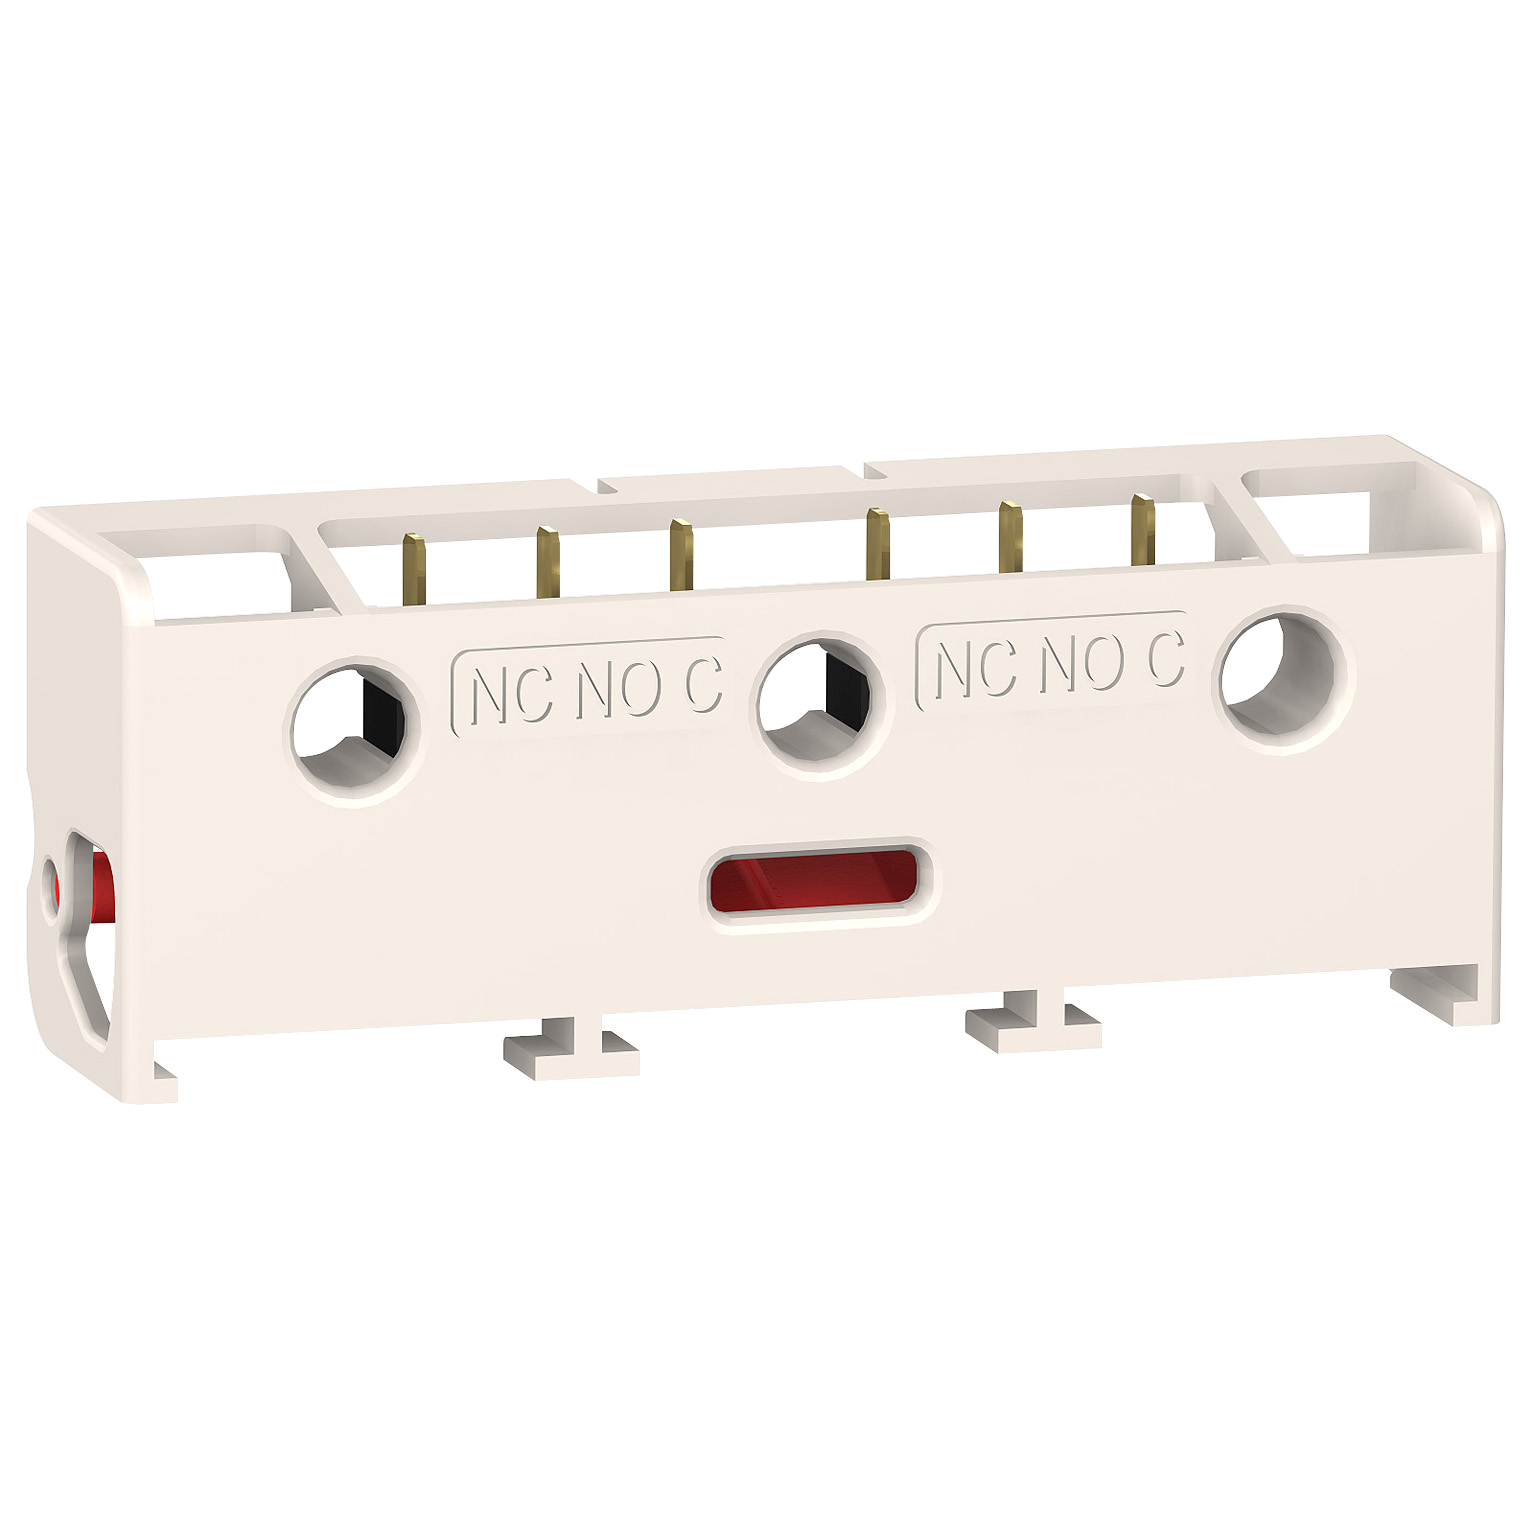 Auxiliary contact block, TeSys DF, 1NC, 5A, disconnector, signalling contact, instantaneous